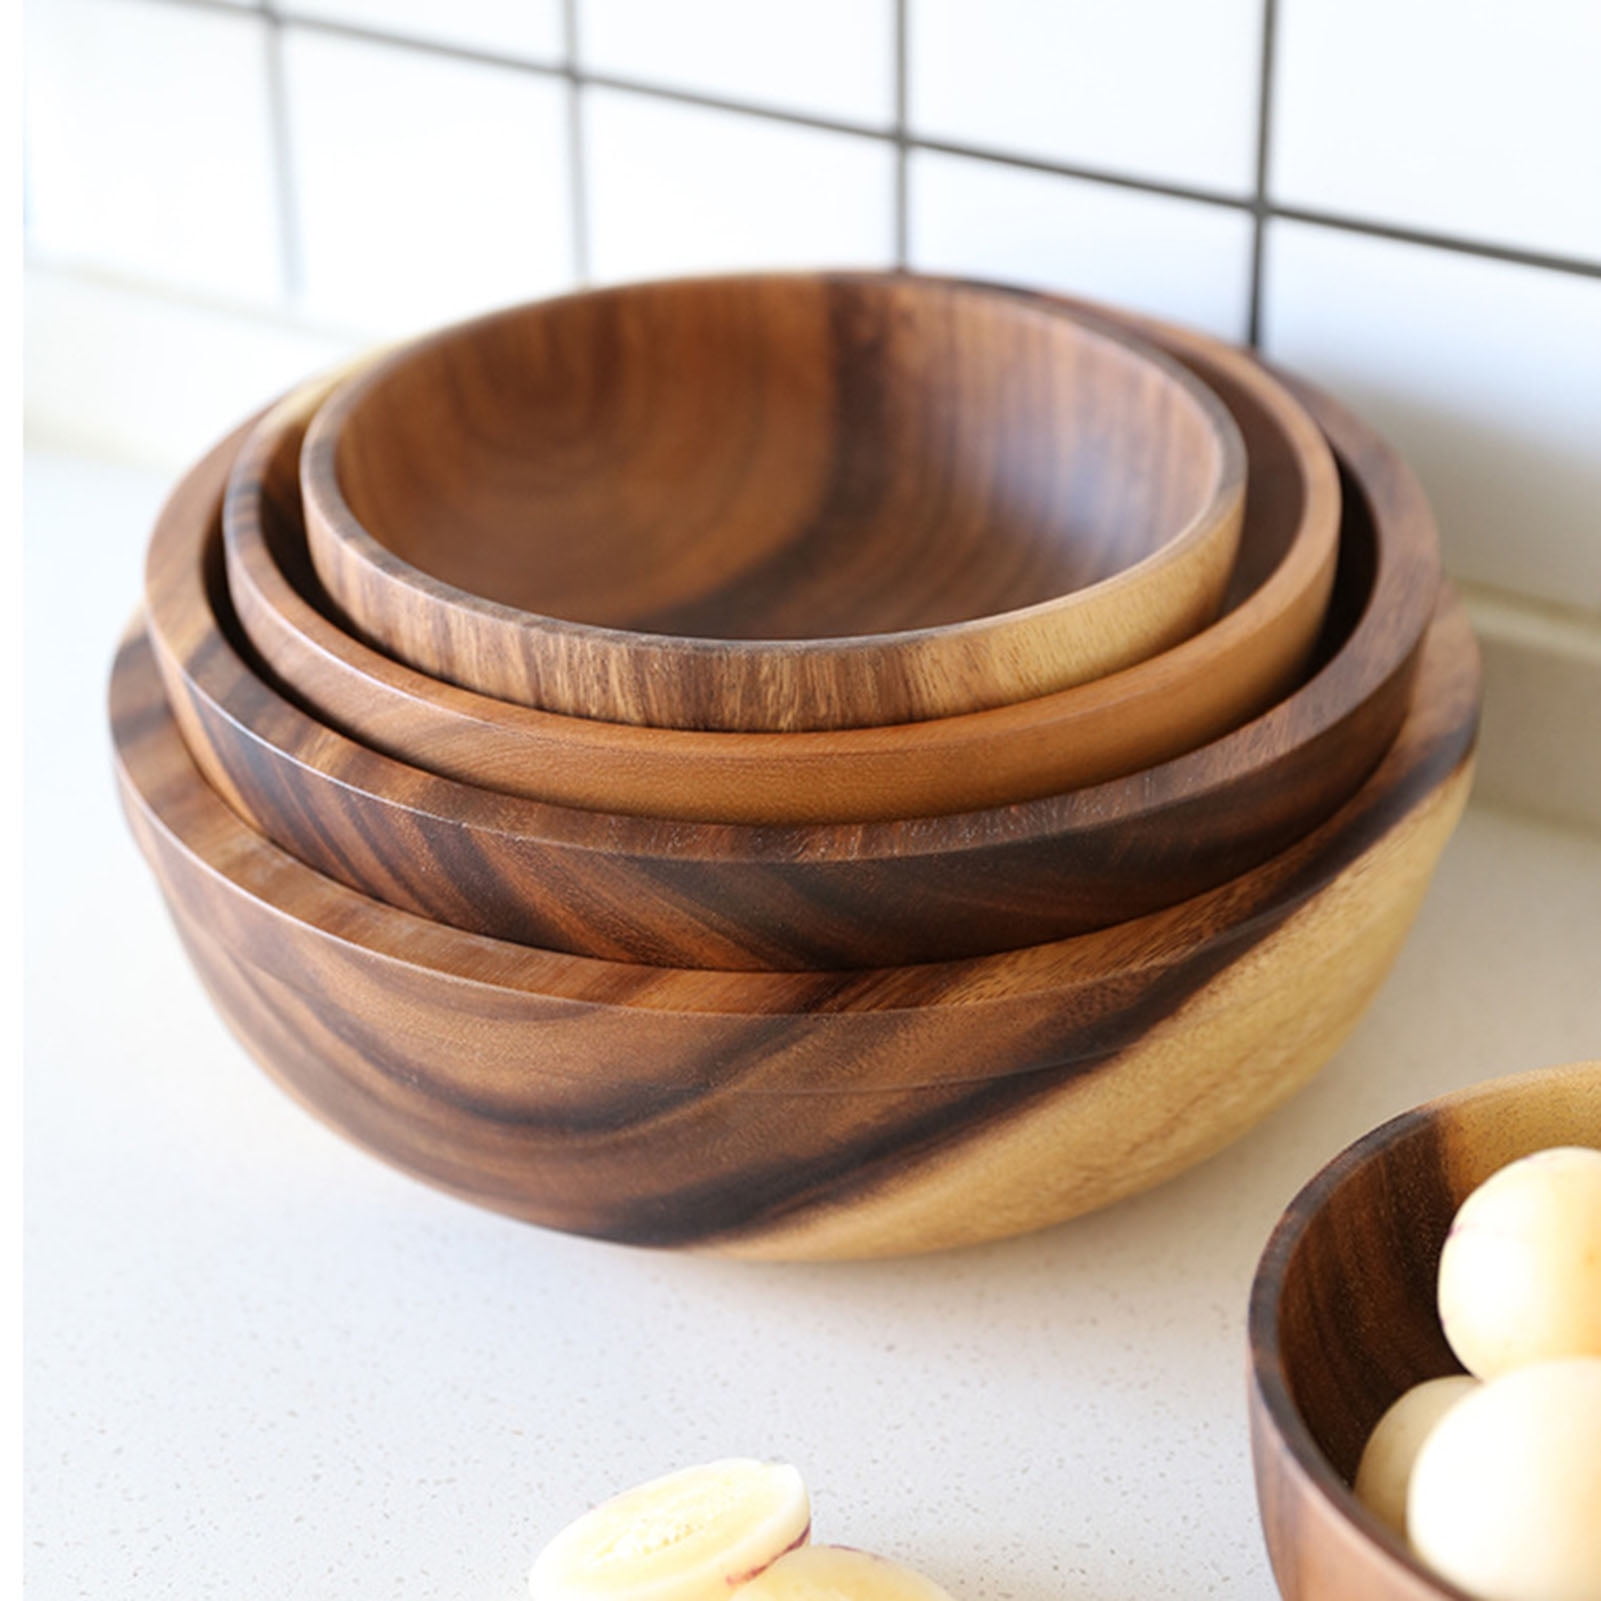 Wooden Woven Salad Bowls Set Of 4 8 Inch Pasta Dishes Fruit Display Bowls 